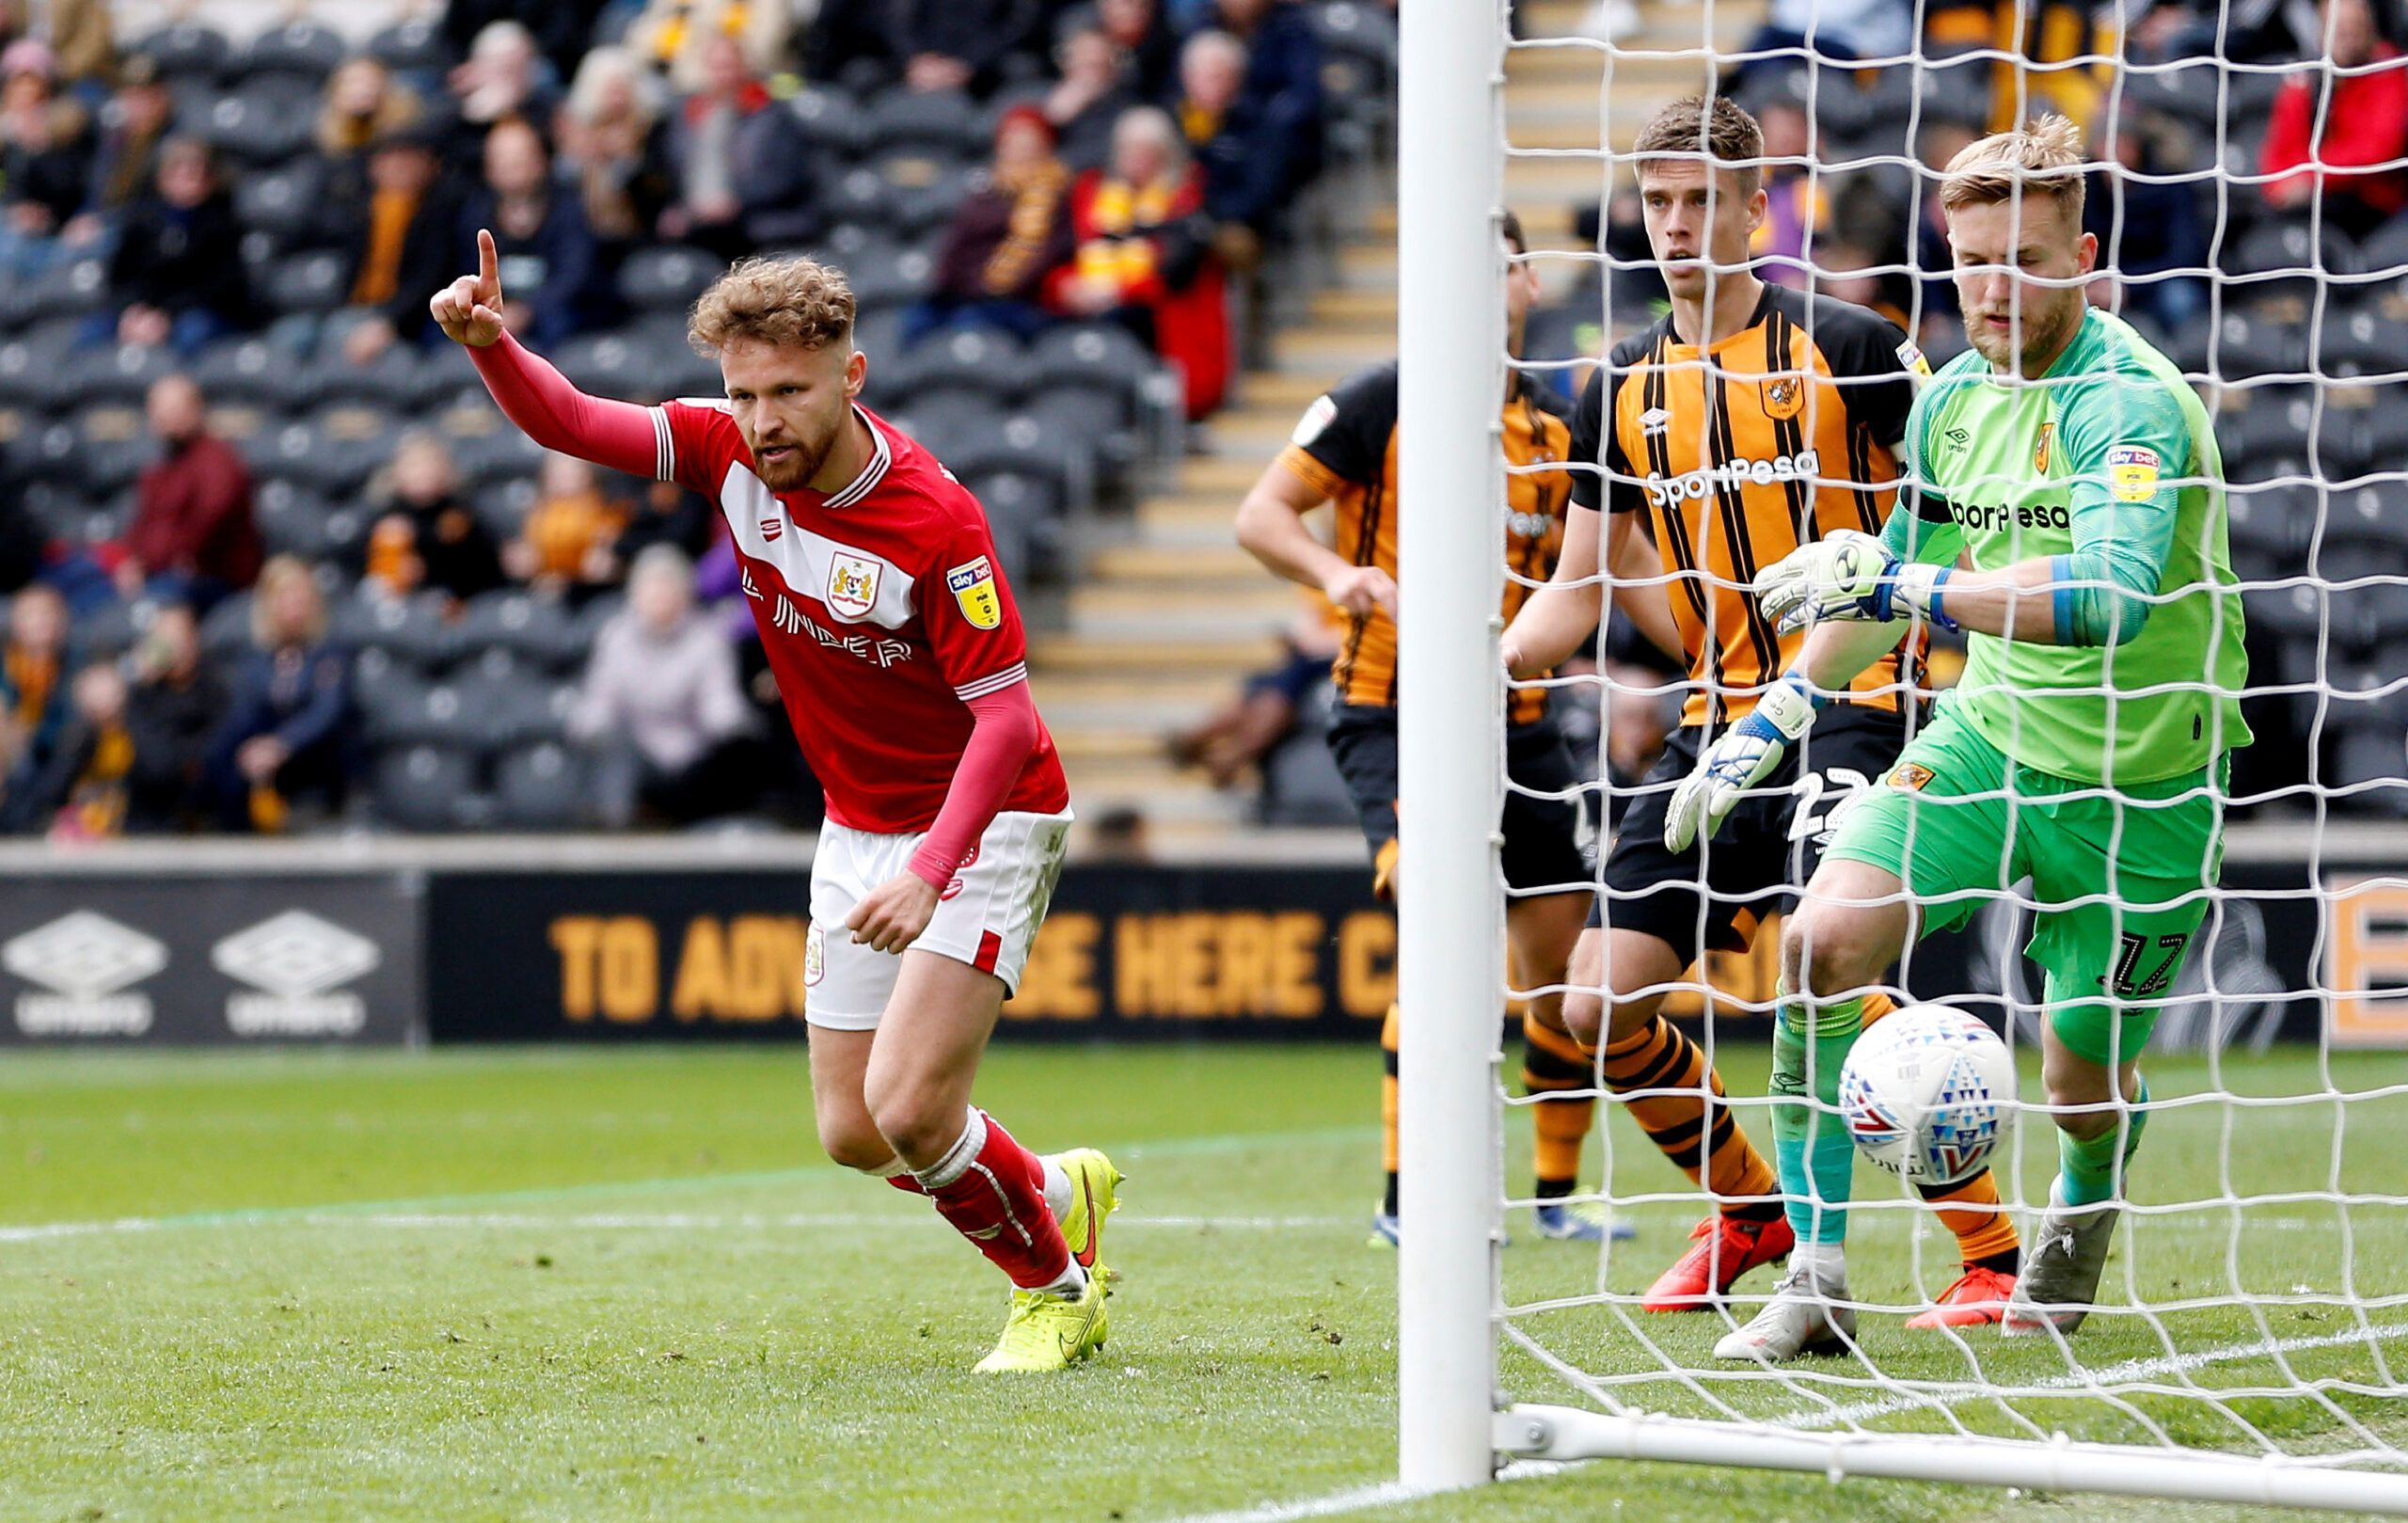 Soccer Football - Championship - Hull City v Bristol City - KCOM Stadium, Hull, Britain - May 5, 2019   Bristol City's Matty Taylor celebrates scoring their first goal      Action Images/Craig Brough    EDITORIAL USE ONLY. No use with unauthorized audio, video, data, fixture lists, club/league logos or 